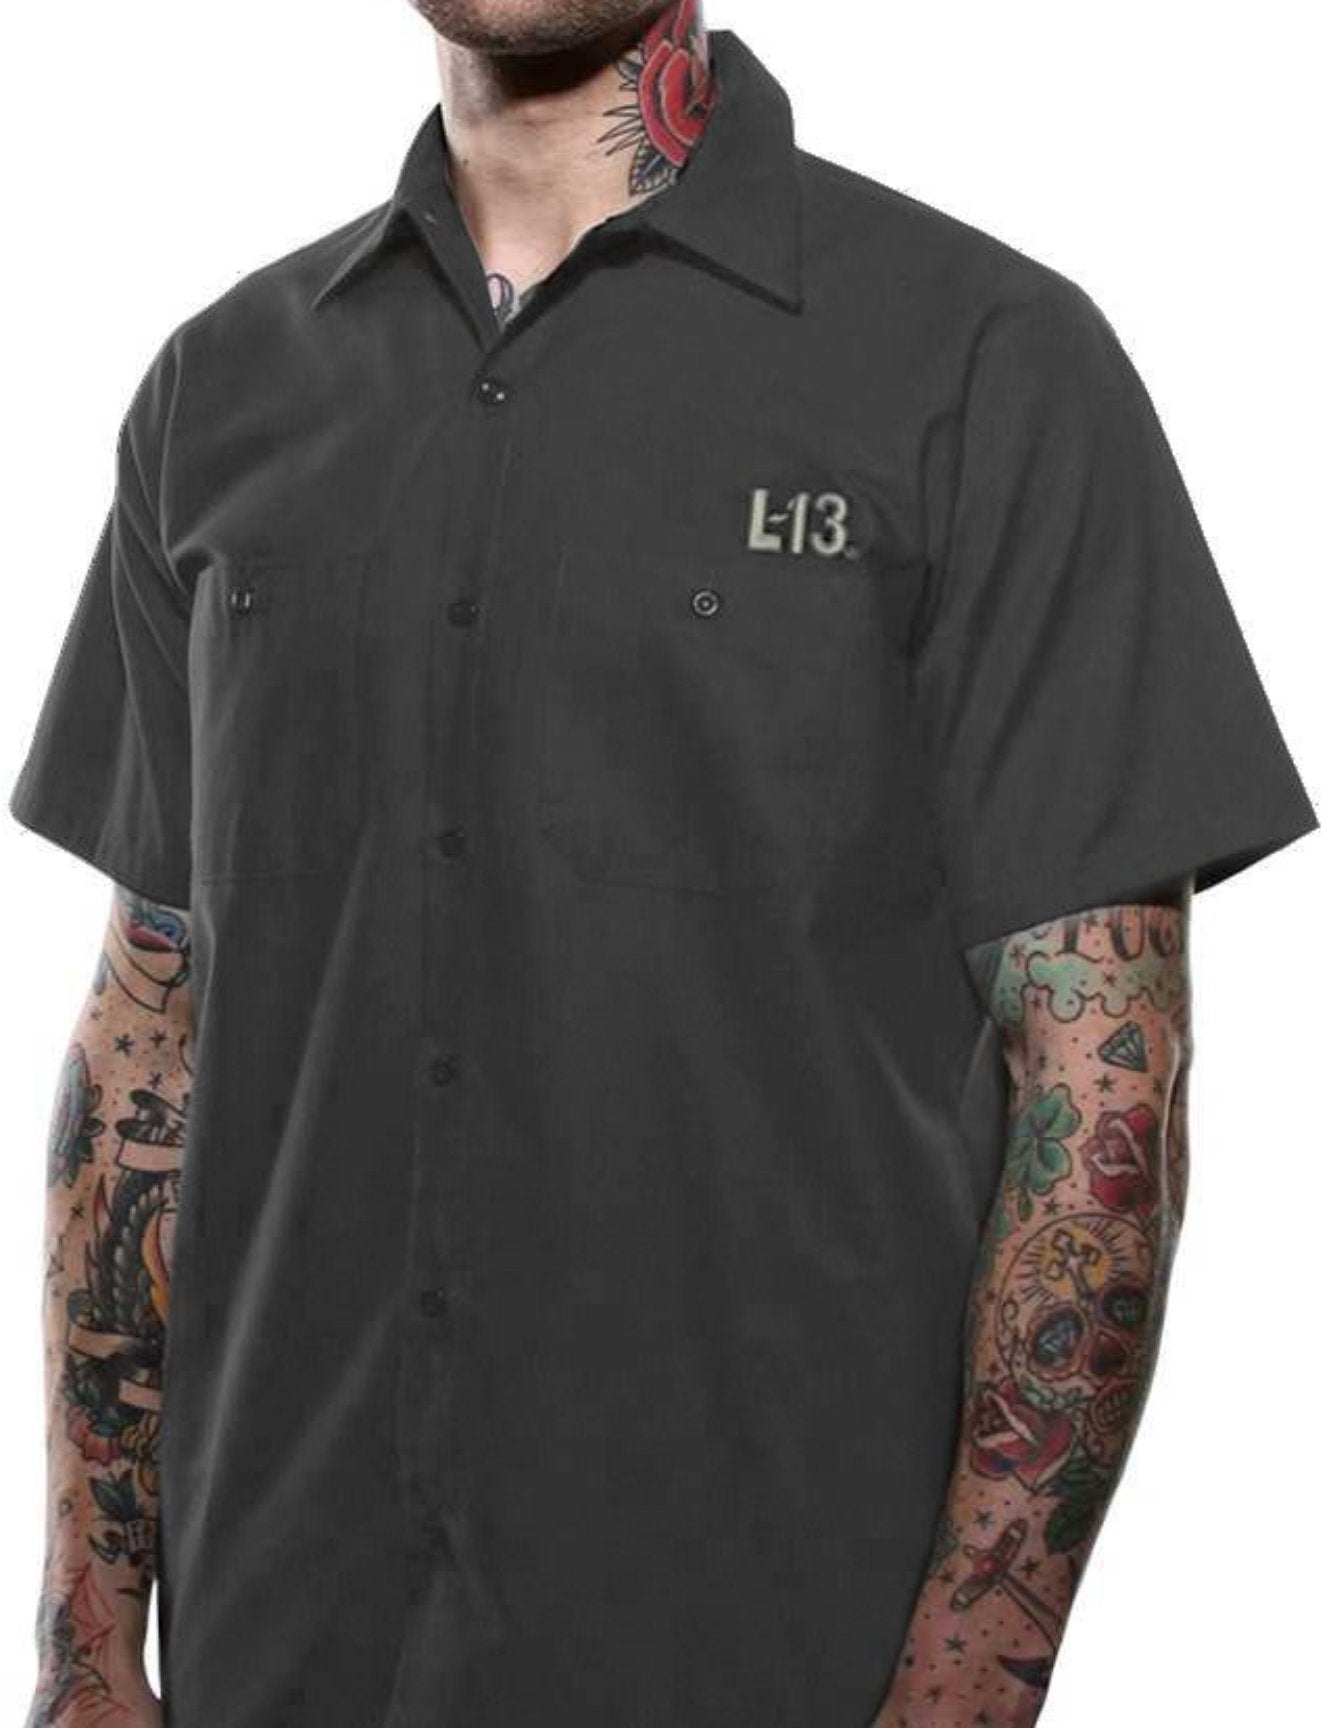 The NO CLUB Work Shirt - CHARCOAL (WEB EXCLUSIVE!)